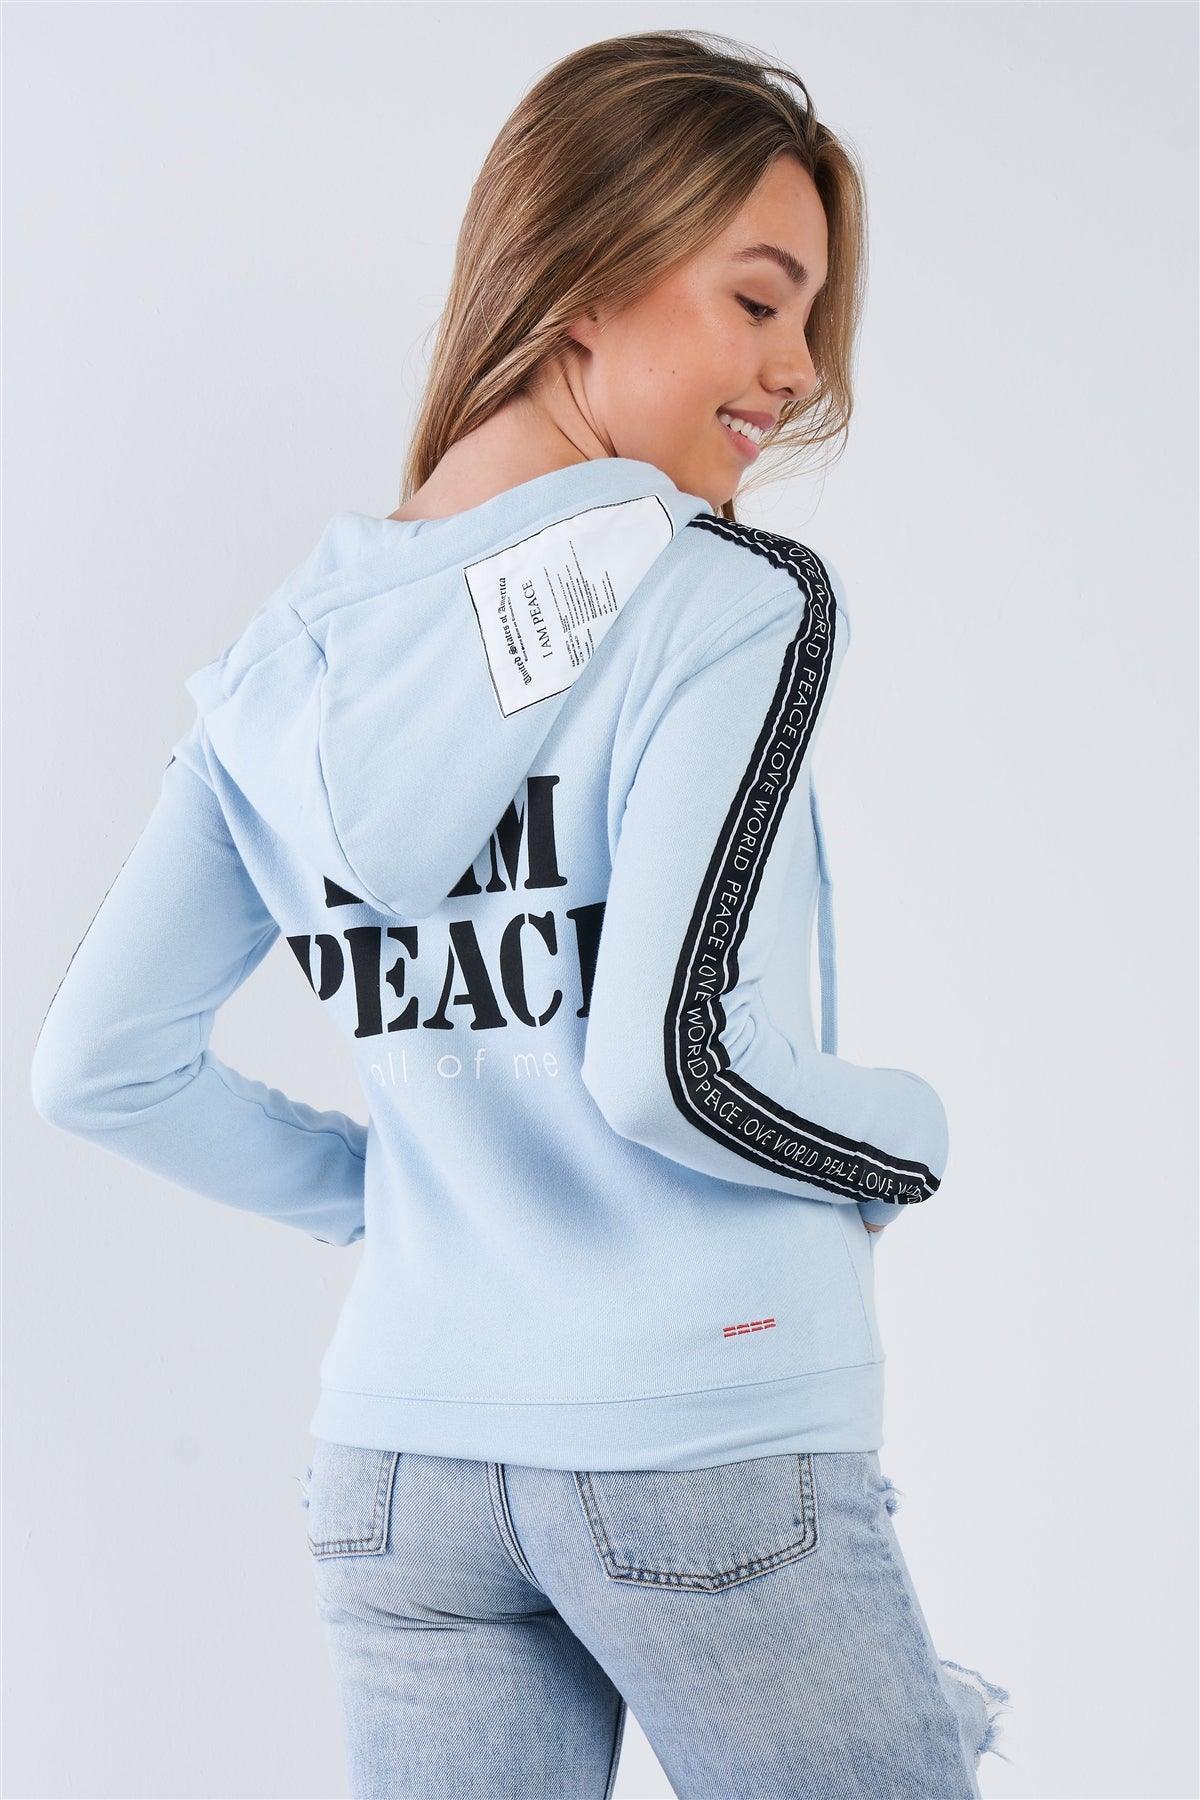 Baby Blue "I Am Peace, All Of Me" Graphic Long Sleeve Hoodie